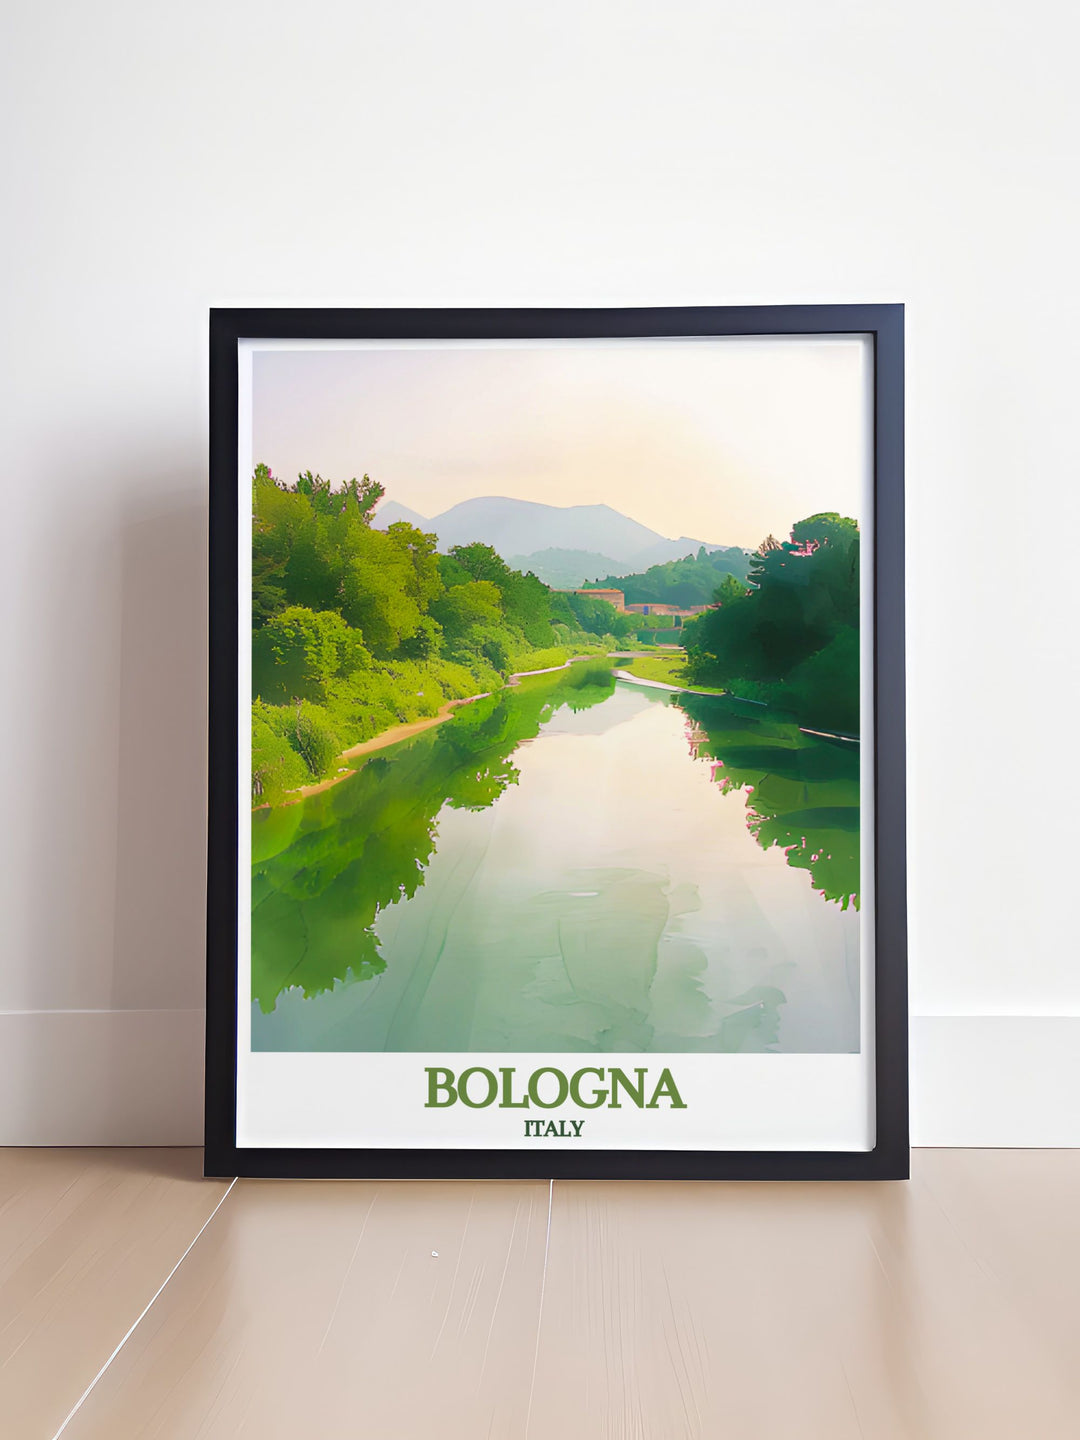 Stunning Bologna art print highlighting the medieval towers and lush banks of the Reno River, ideal for history buffs and nature enthusiasts.